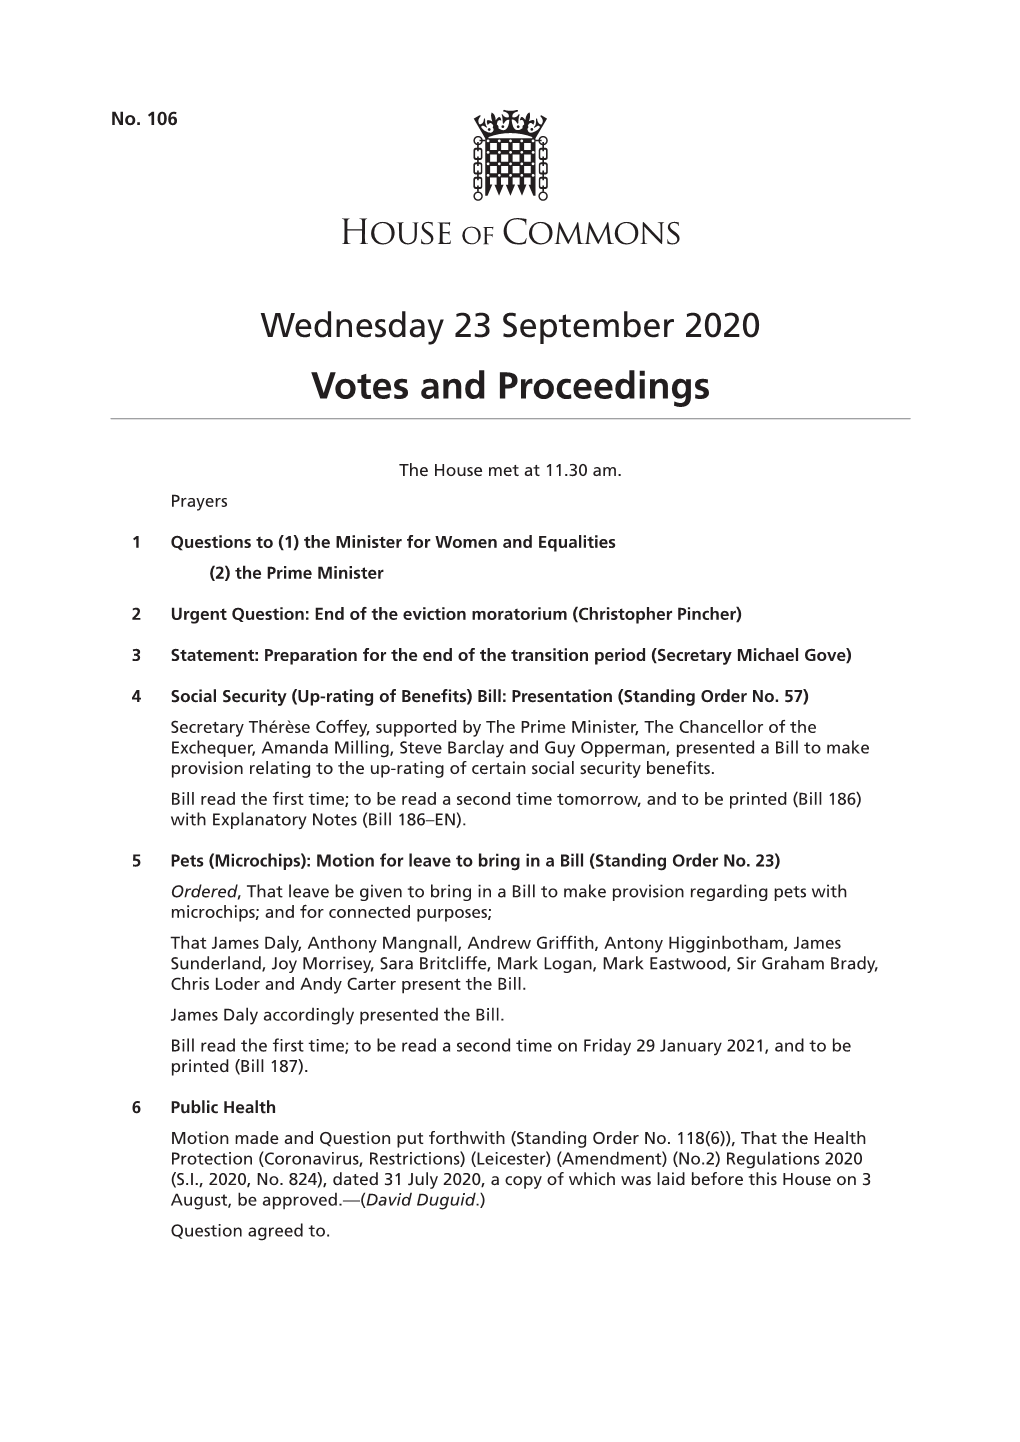 23 September 2020 Votes and Proceedings